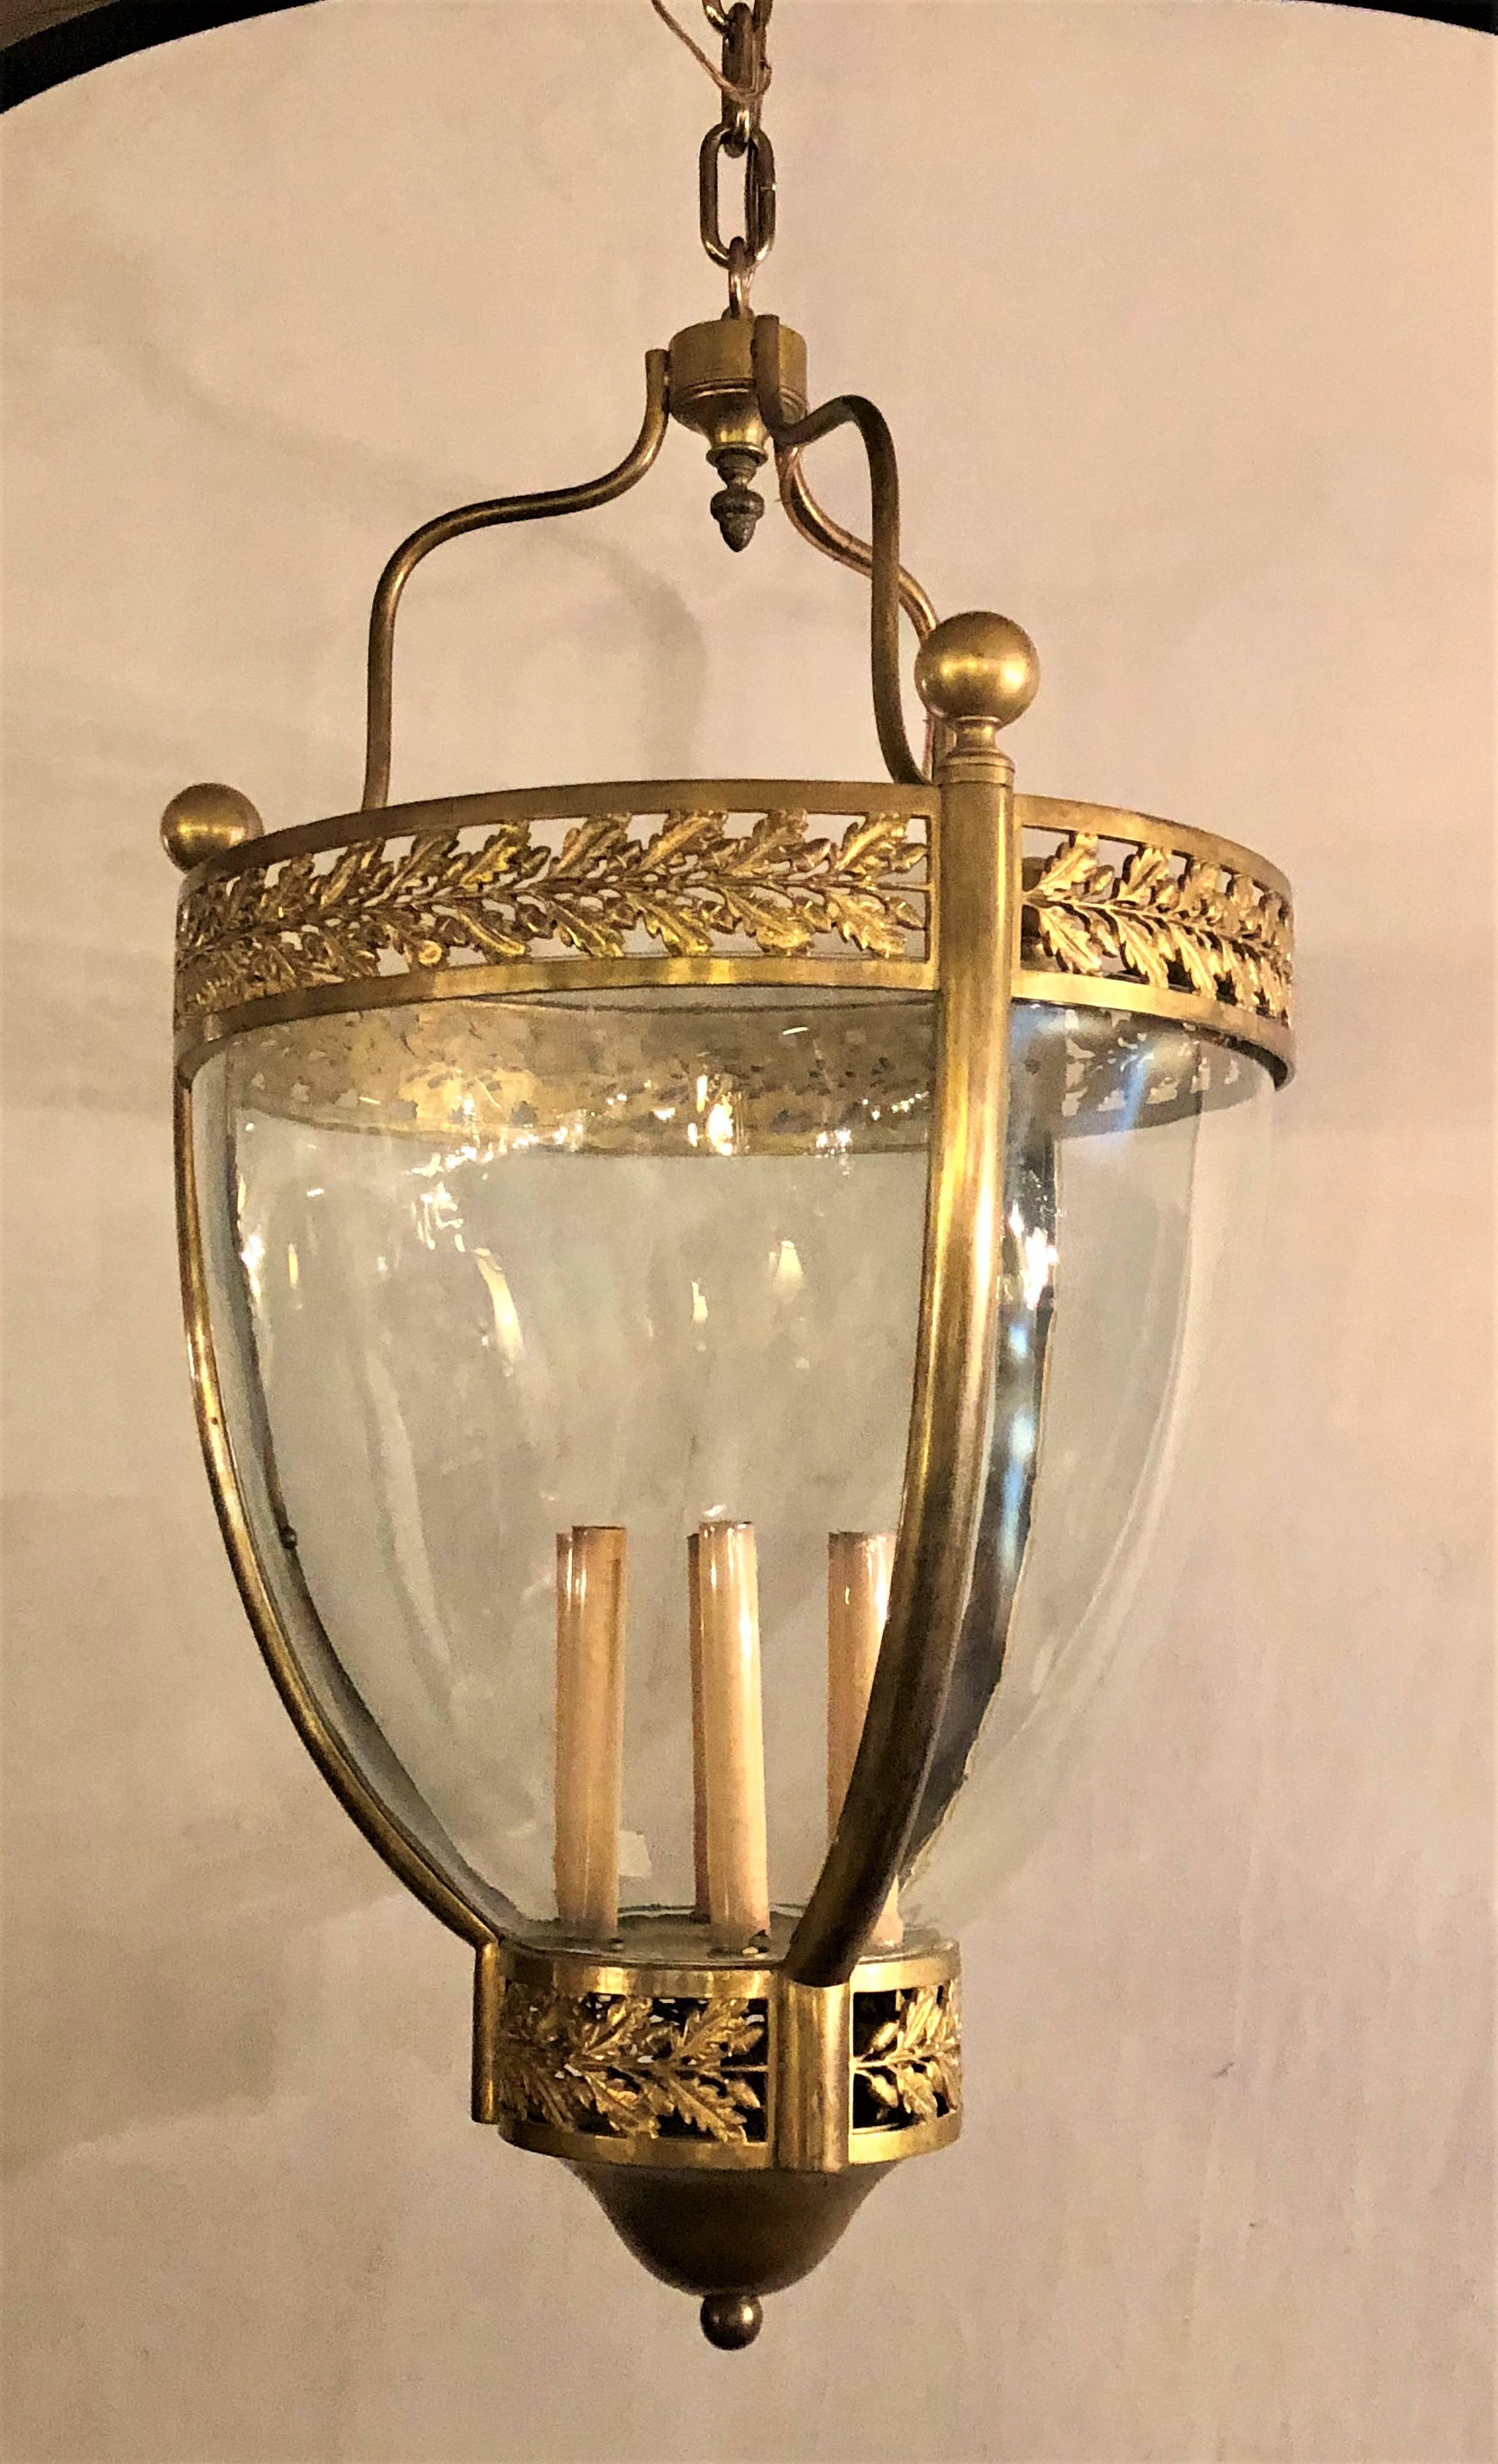 A 19th century bronze and glass bell jar large chandelier. Chain is 6 feet long.